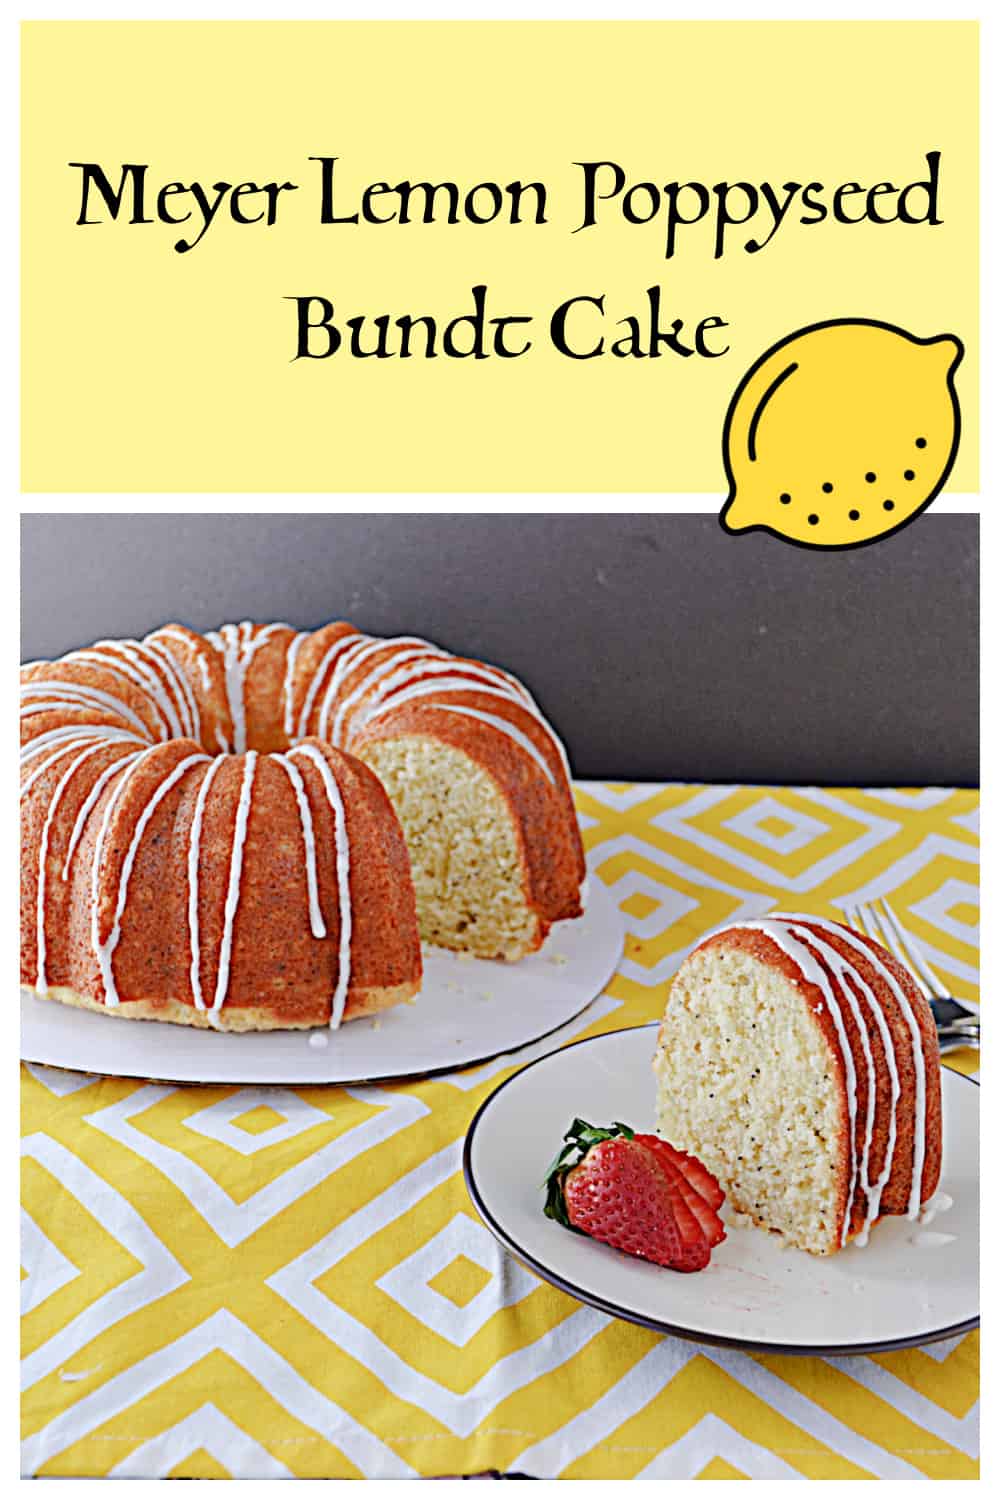 Pin Image:   Text title, a front view of a slice of lemon cake with the Bundt cake behind it on a platter.